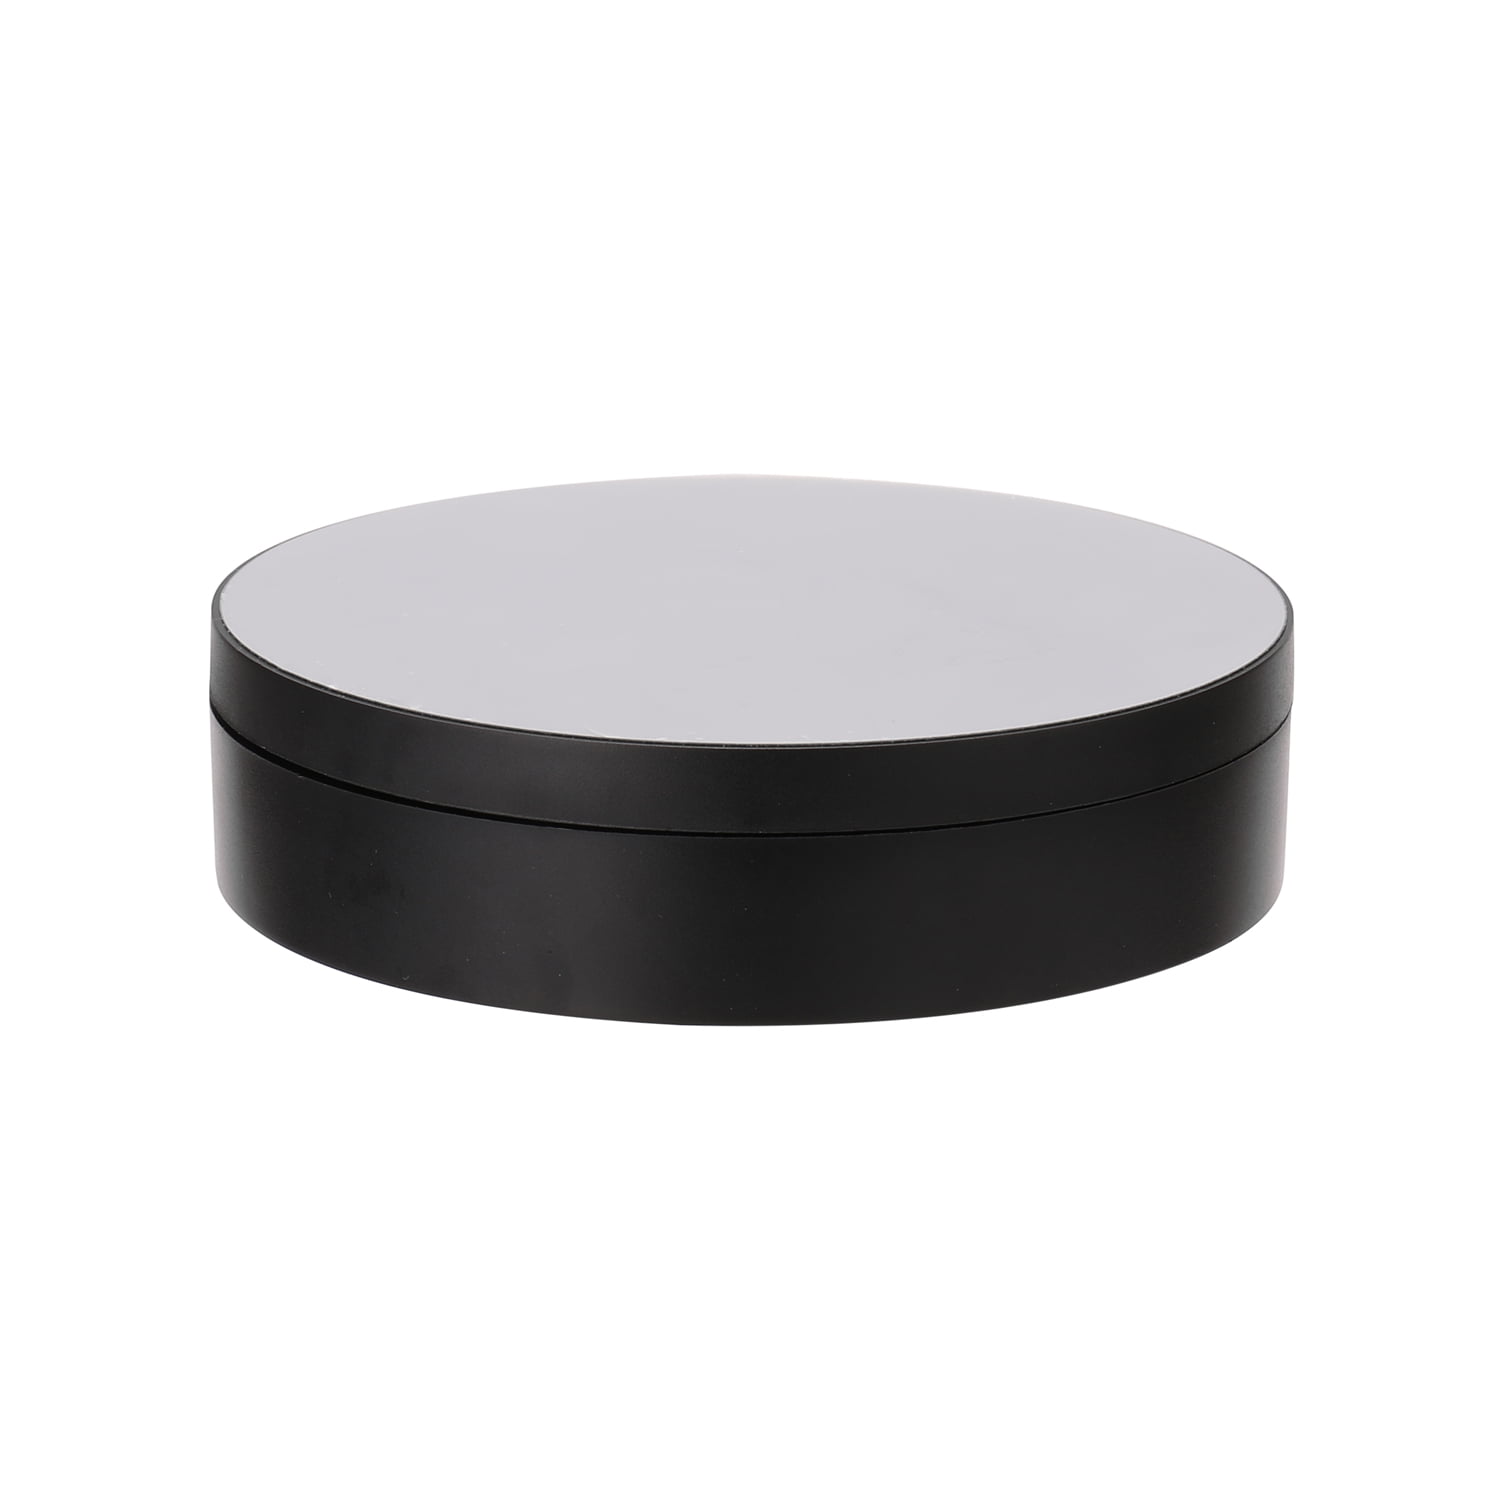 Details about   360 Degree Electric Rotating Turntable Display Stand for Video Photography T0I2 